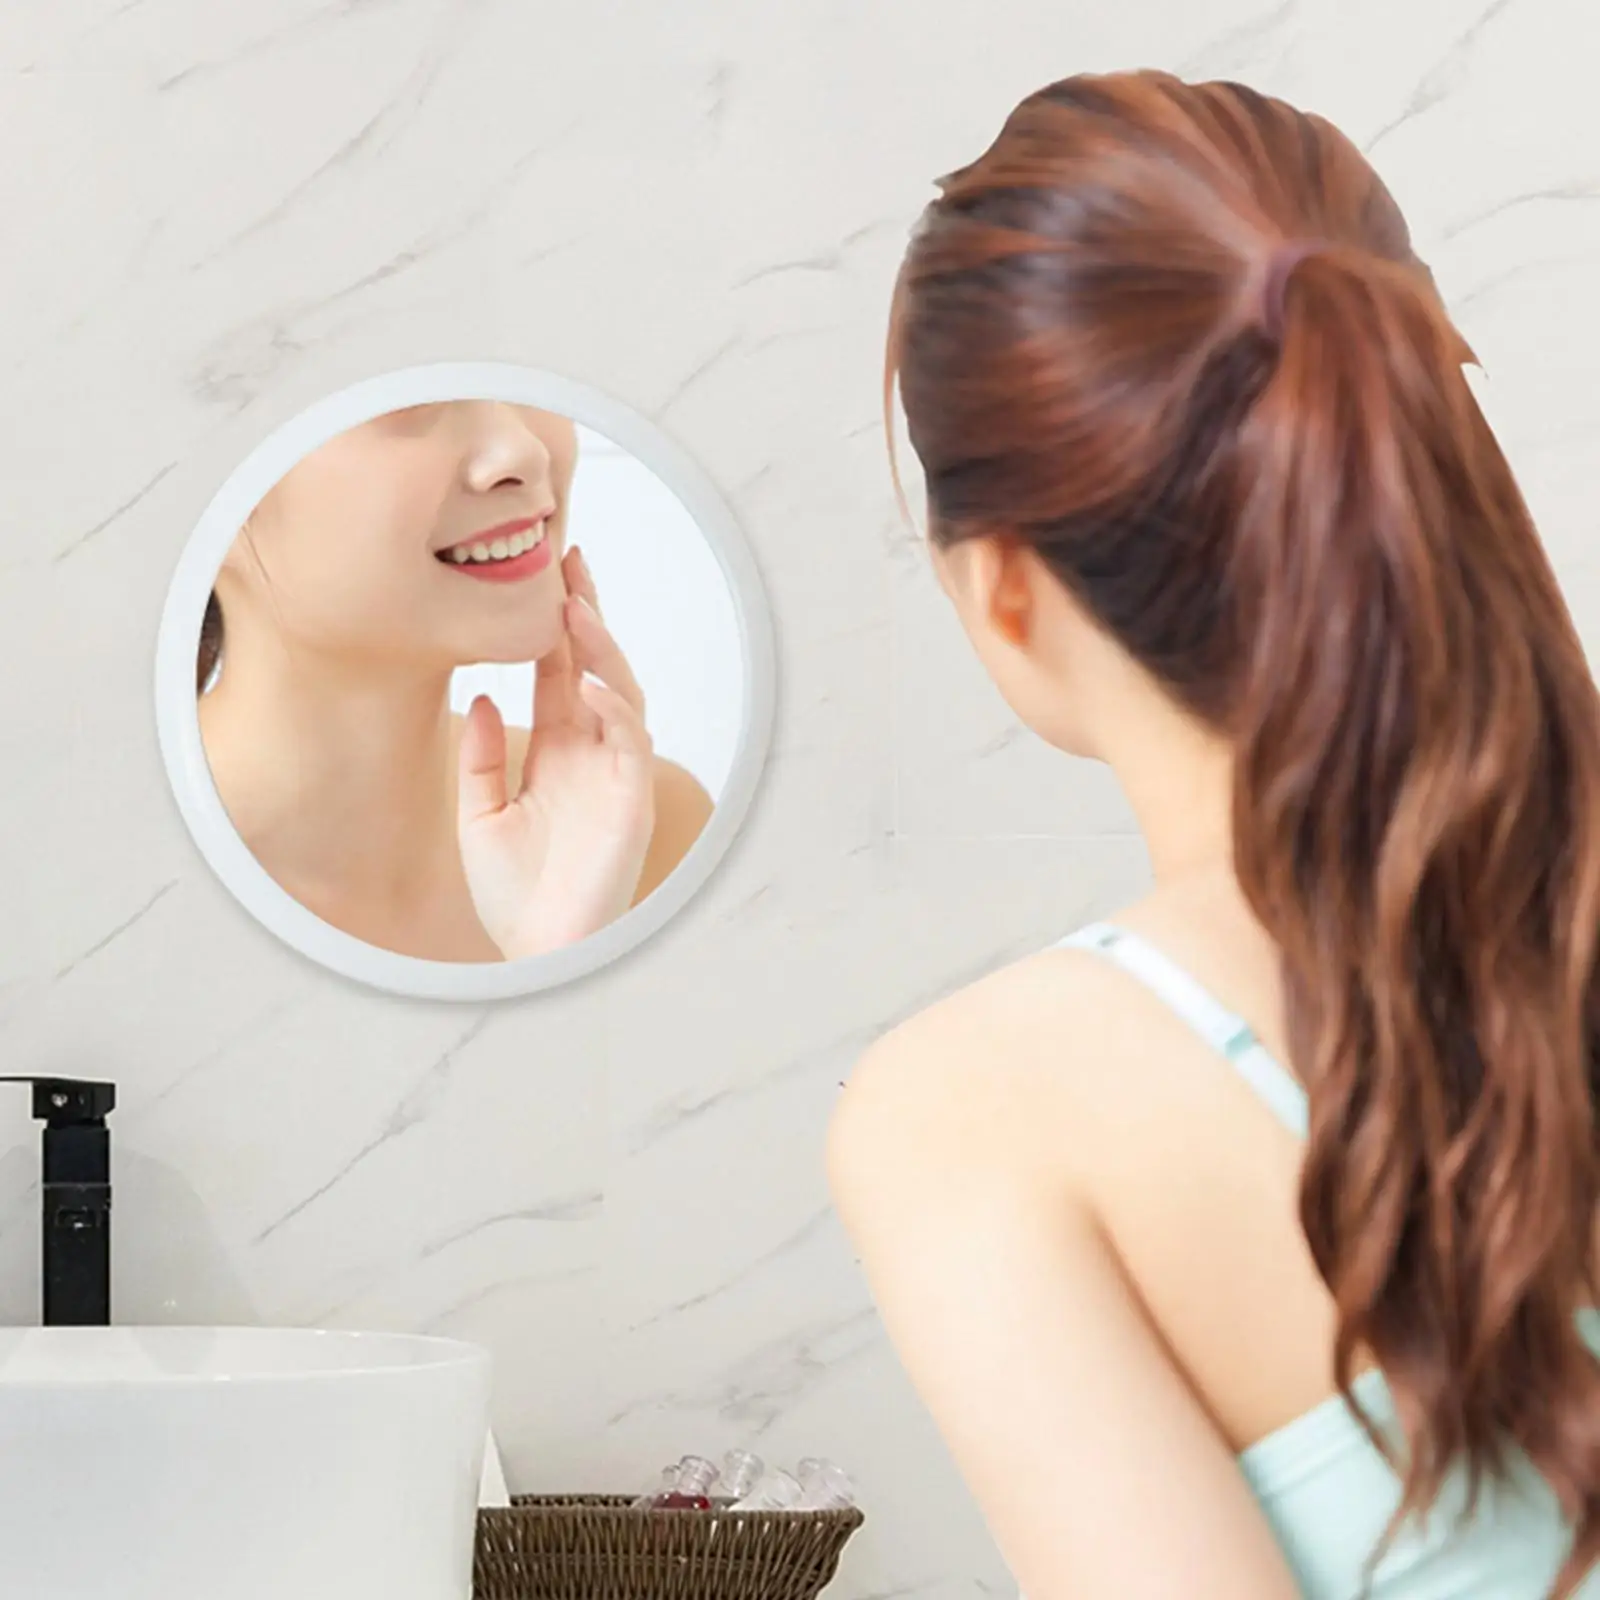 Home Wall Suction Bathroom Mirror Folding Rotatable Simple Installation Multi Purpose Vanity Mirror Just One Stick and One Click